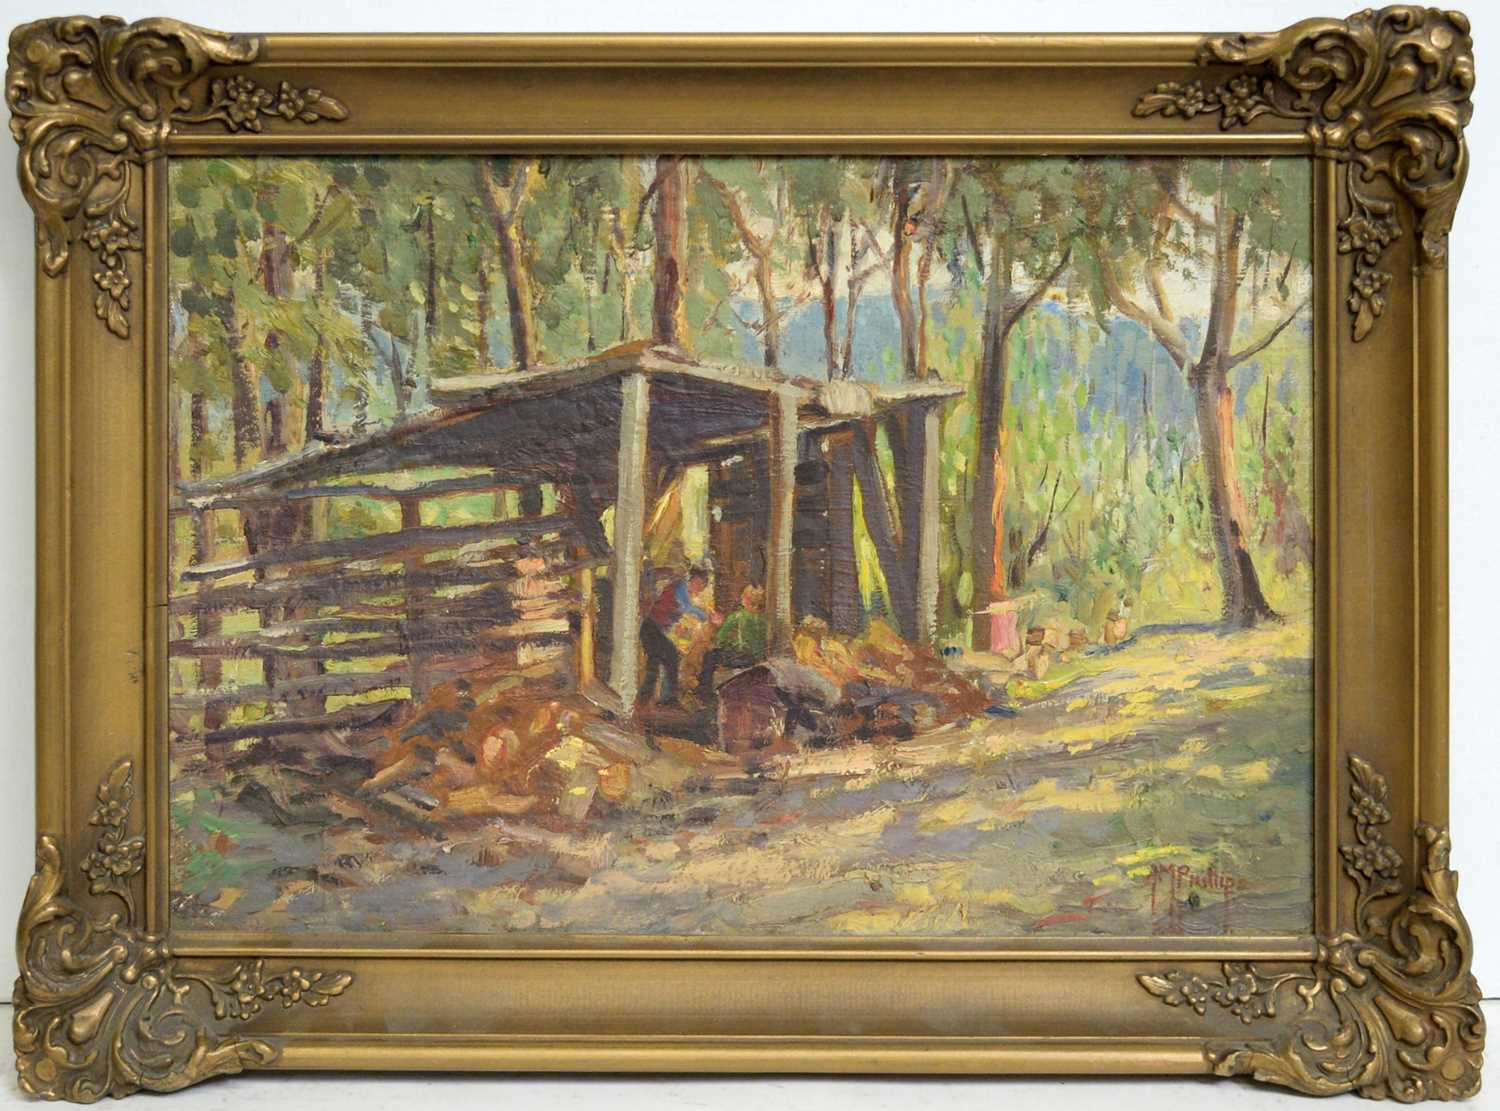 Lot 772 - A. M. Phillips - The Woodshed in Dappled Light | oil